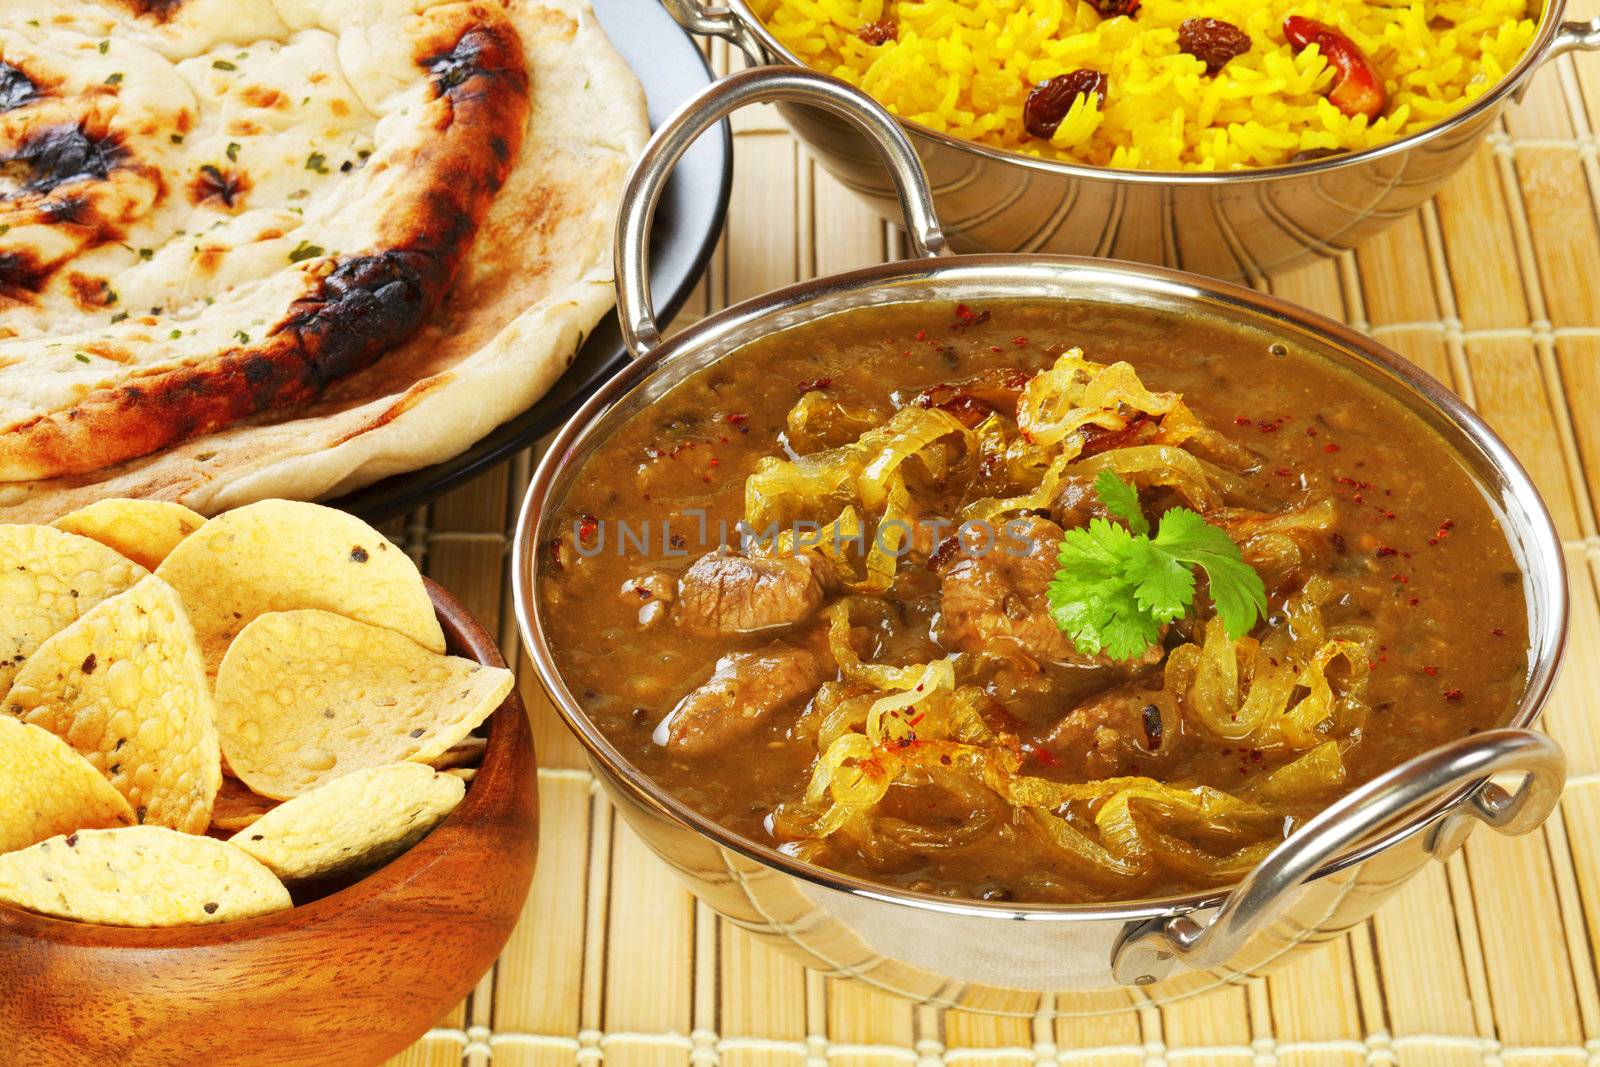 Lamb Dhansak, a tasty curry made with lamb, lentils and vegetables, with poppadums, naan bread, yellow rice.